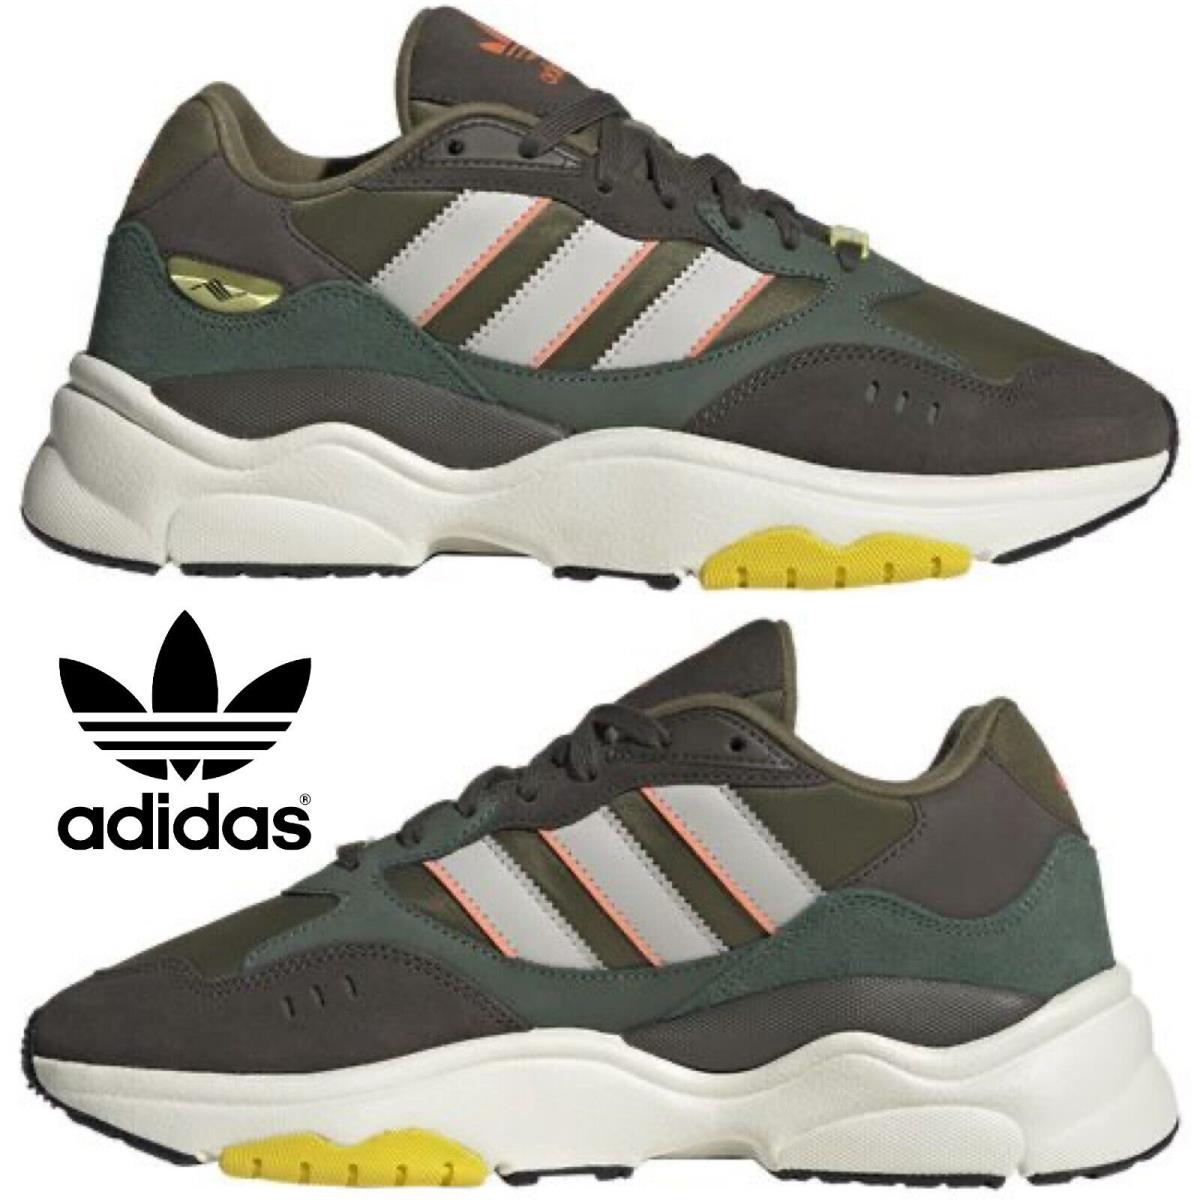 Adidas Retropy F90 Men`s Sneakers Running Shoes Gym Casual Sport Green Olive